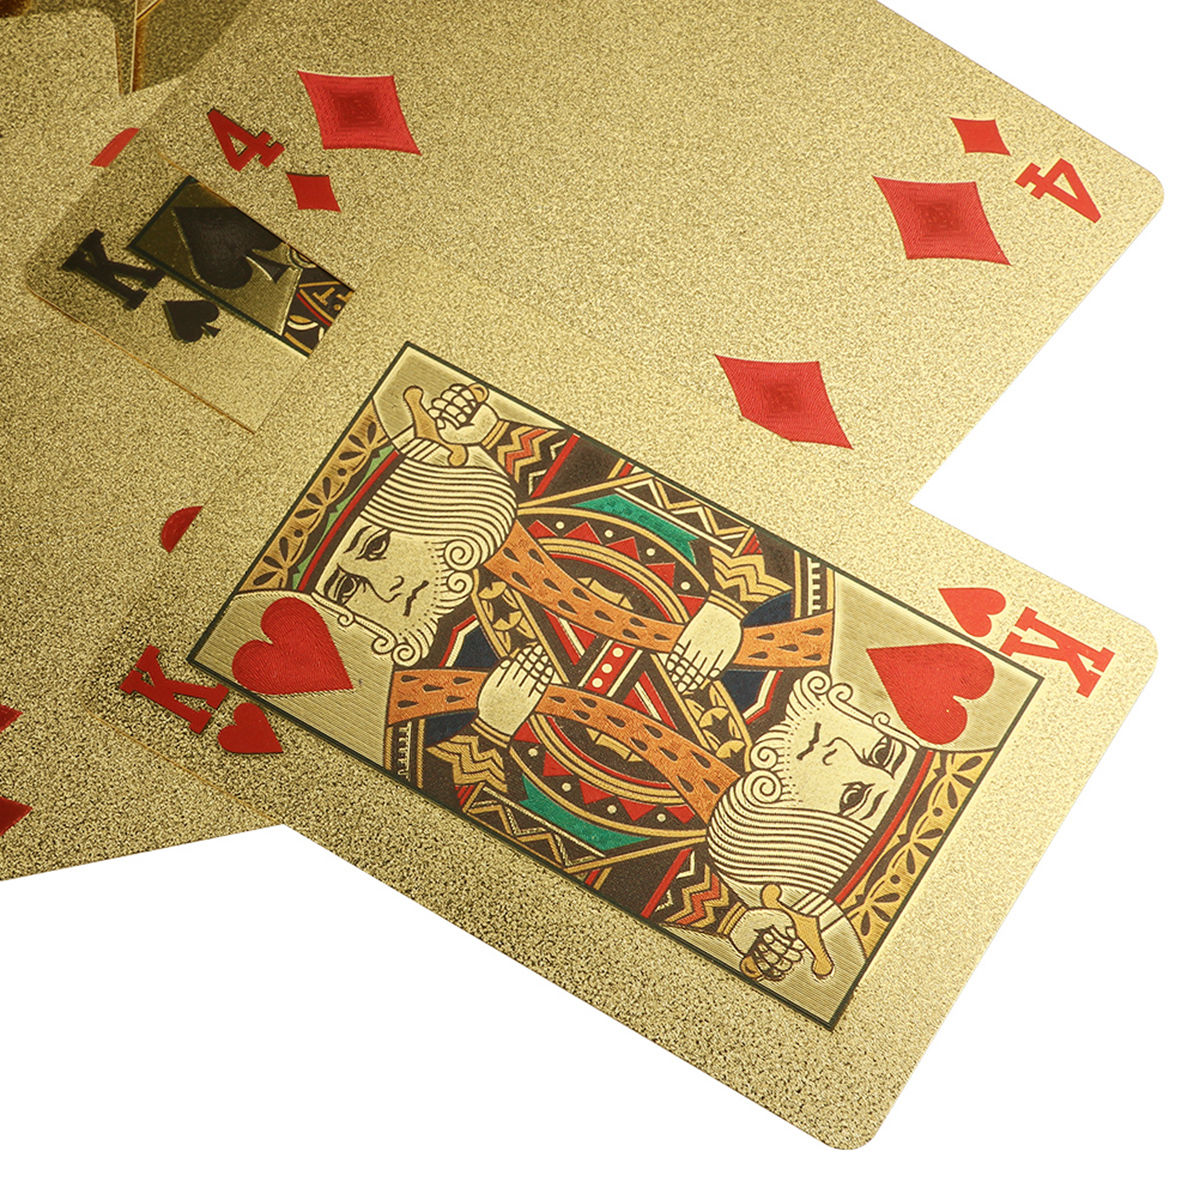 24 Karat Gold Foil Playing Cards 24K Gold and Silver Plated Replica Bills 7